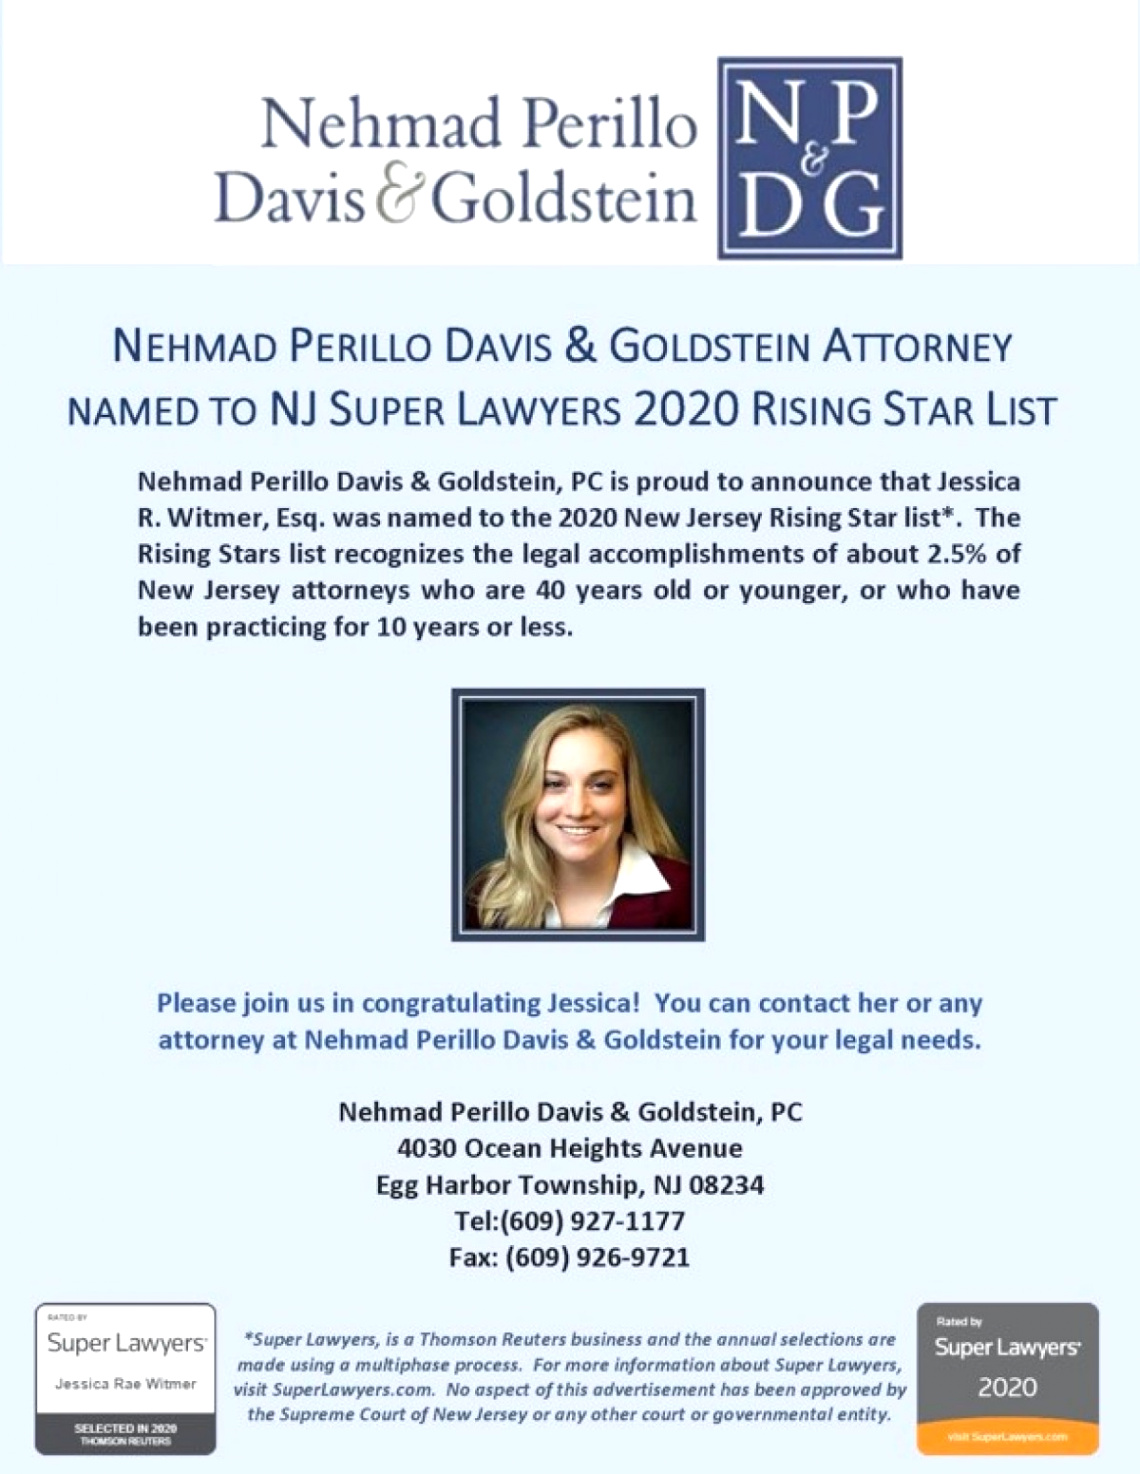 npdg attorney named to nj super lawyers 2020 rising star list